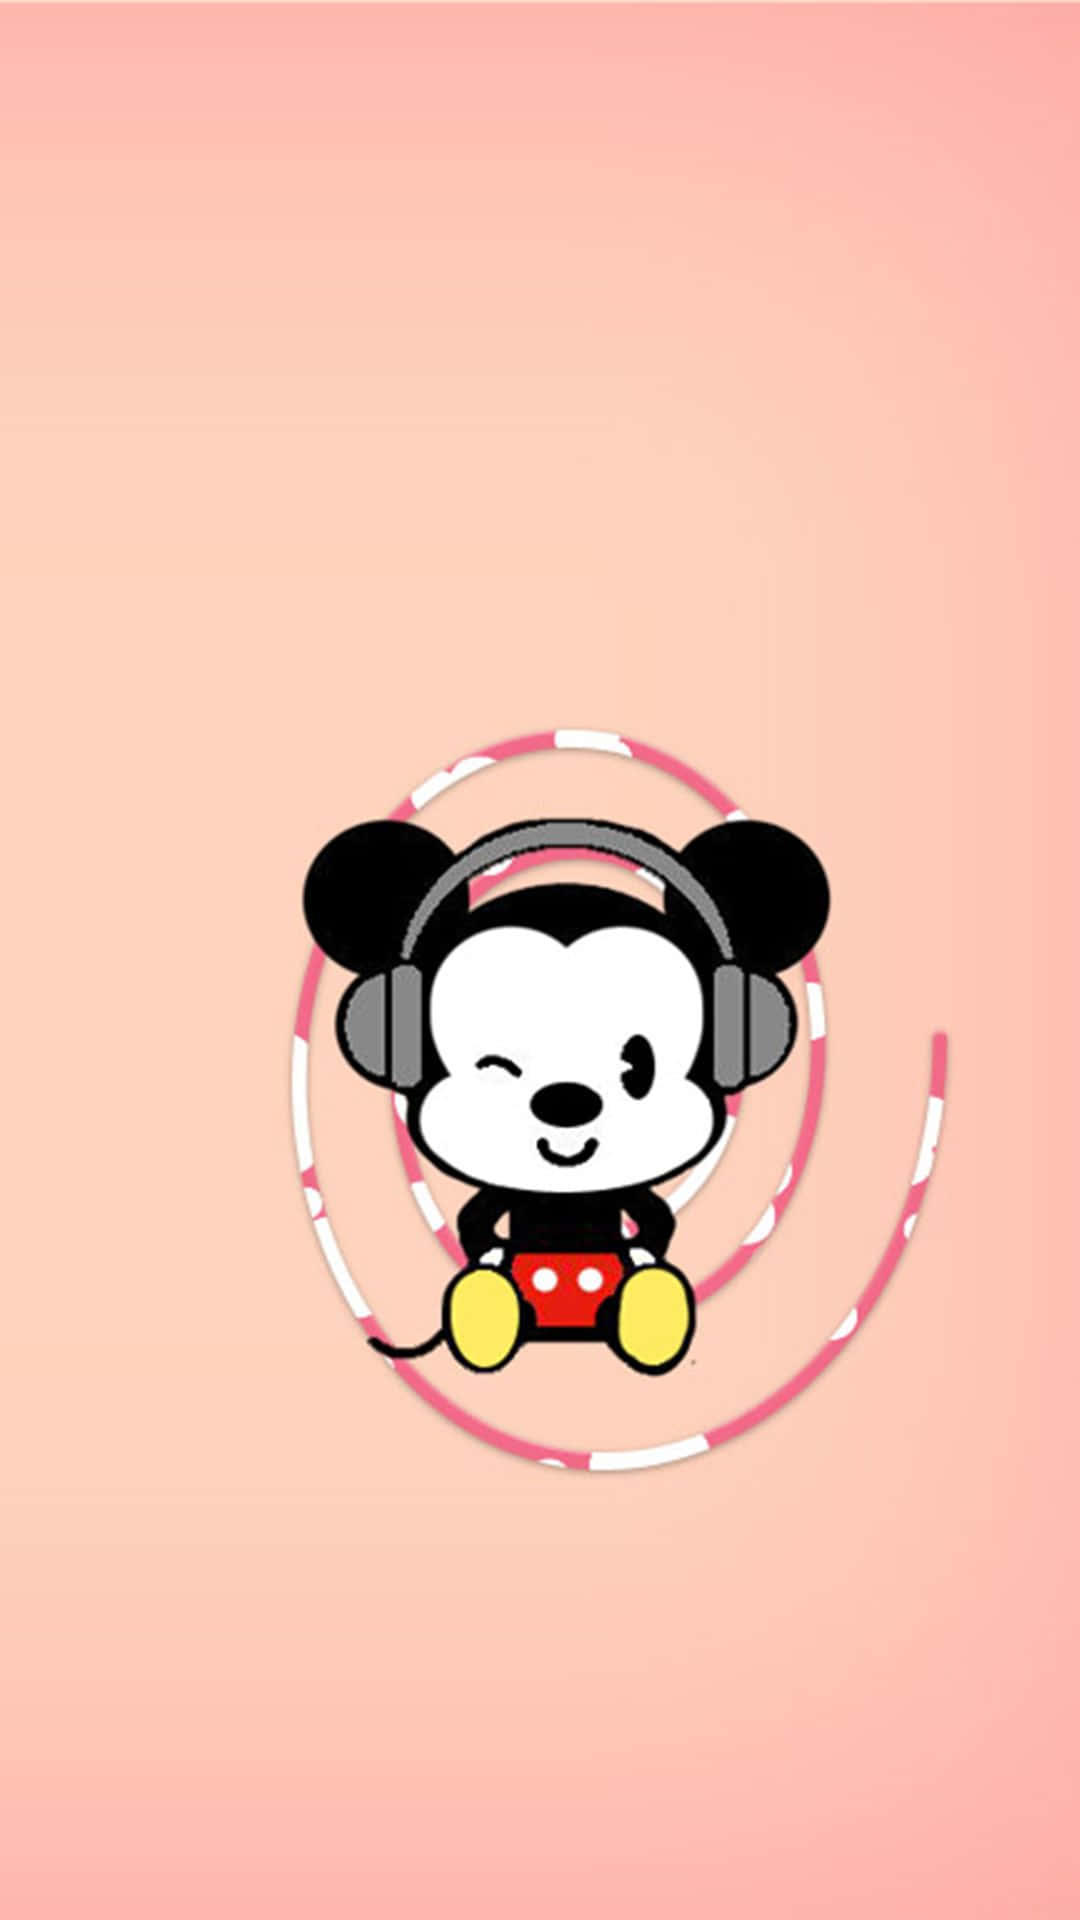 "Cute Mickey Mouse Spreads his Joy" Wallpaper